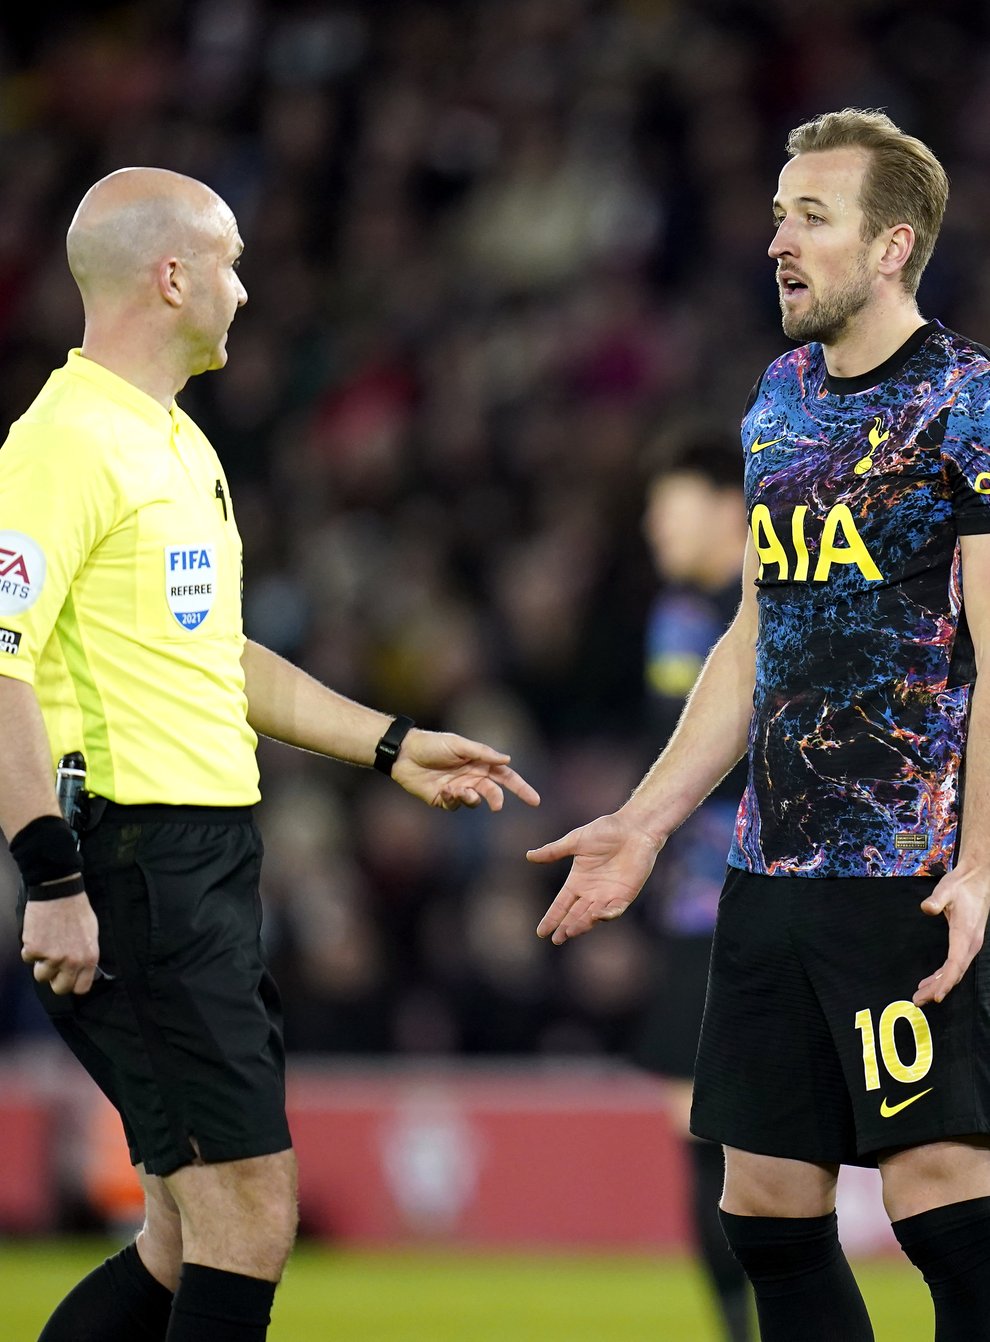 Harry Kane had a goal ruled out for offside as Tottenham were held to a 1-1 draw at Southampton (Andrew Matthews/PA)